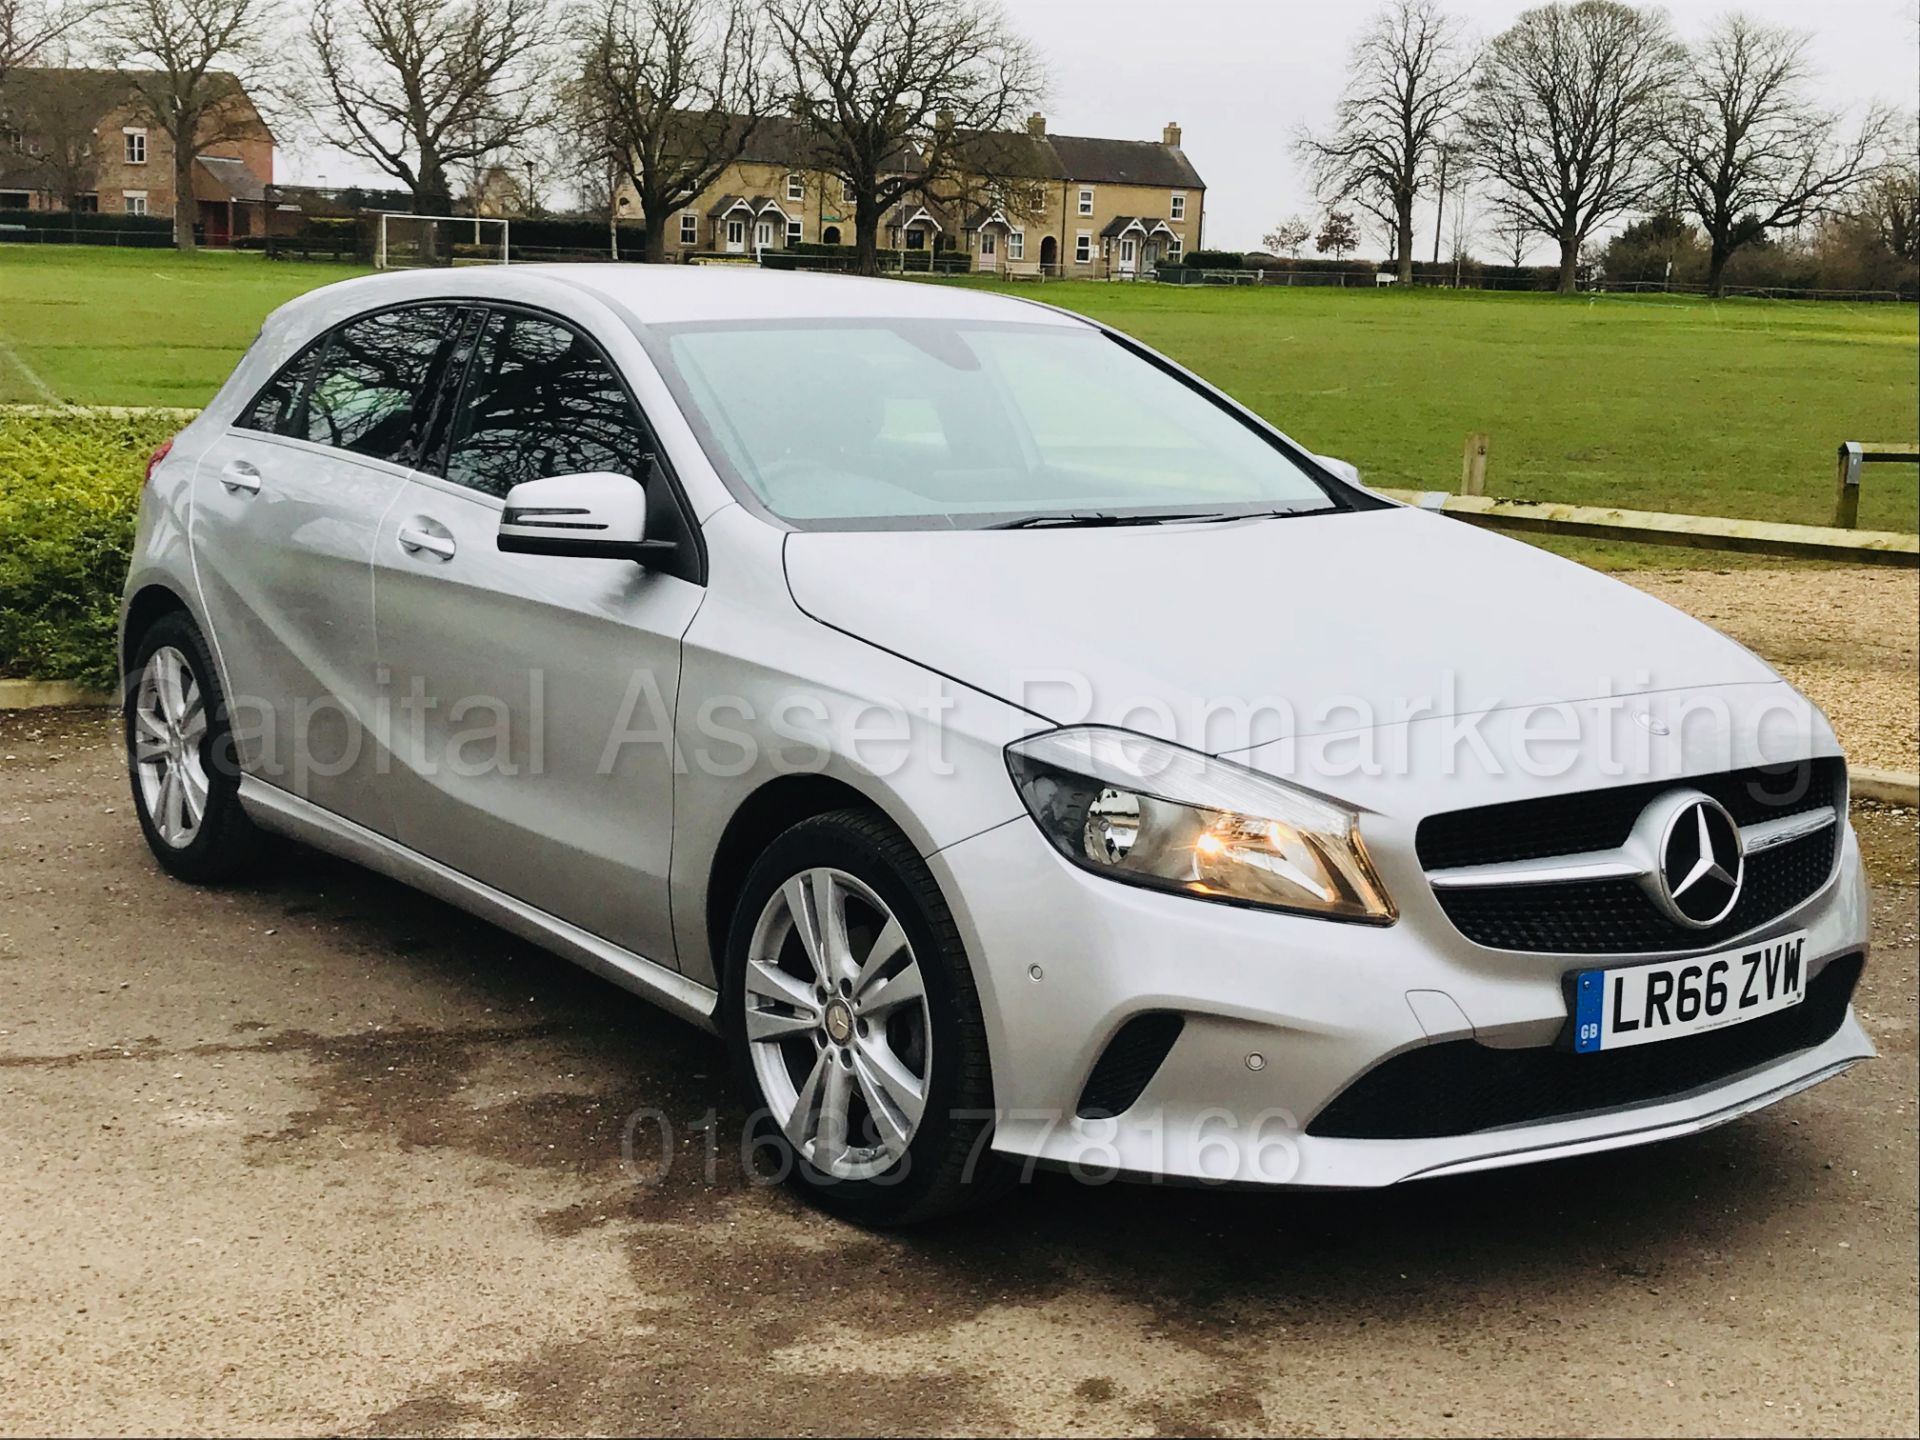 MERCEDES-BENZ A180D 'SPORT' (2017 MODEL) '7G TRONIC AUTO - LEATHER - SAT NAV' (1 OWNER FROM NEW) - Image 3 of 41